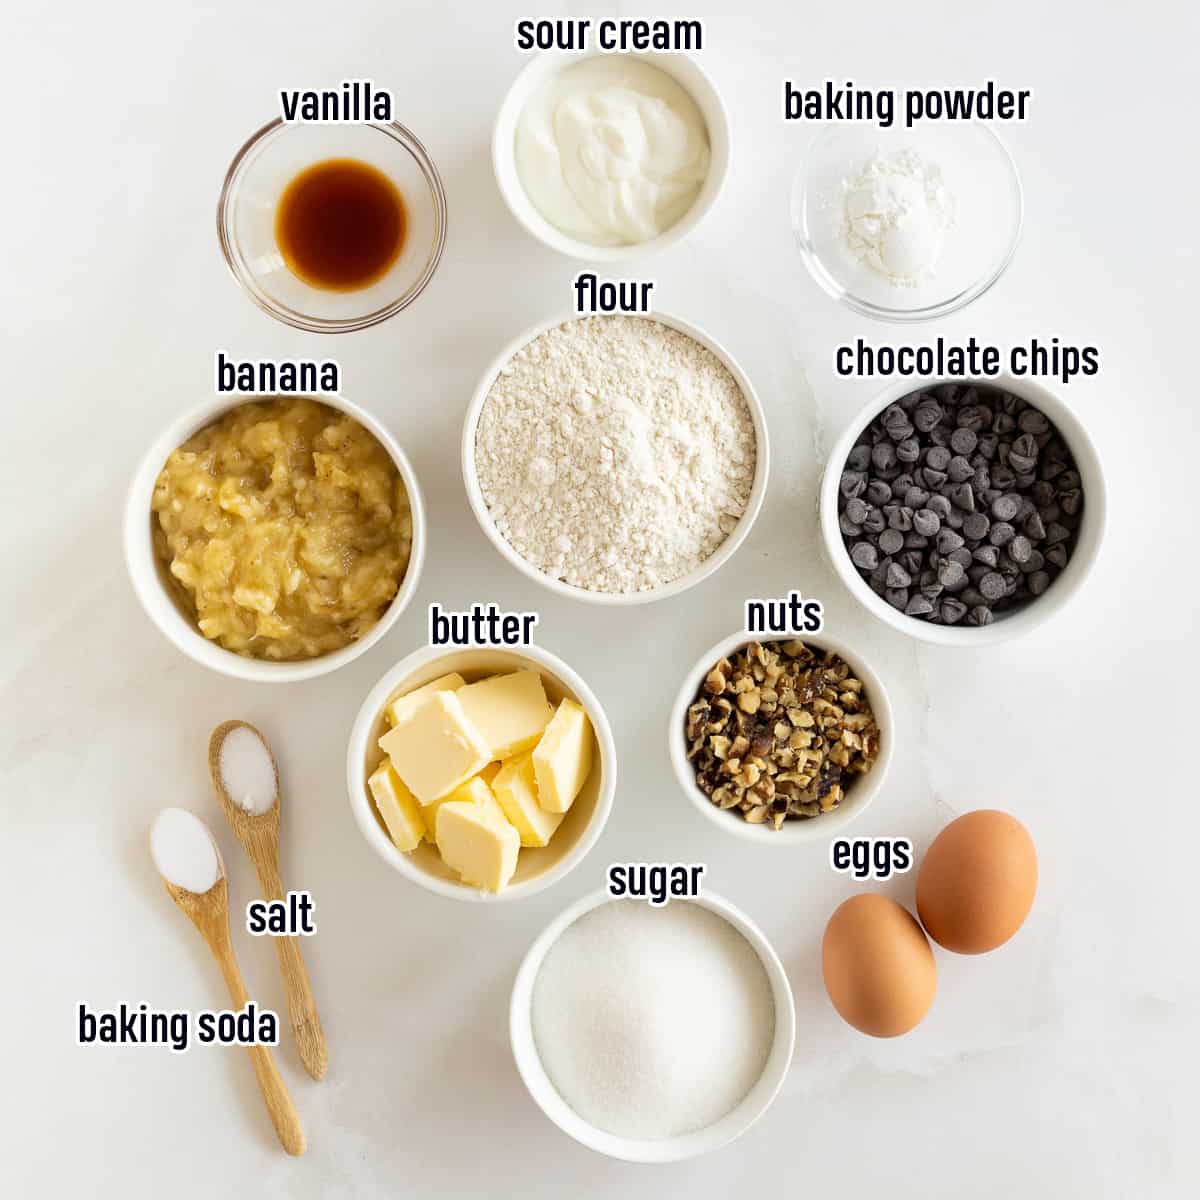 Flour, sour cream, mashed banana, chocolate chips, and other ingredients in bowls with text.